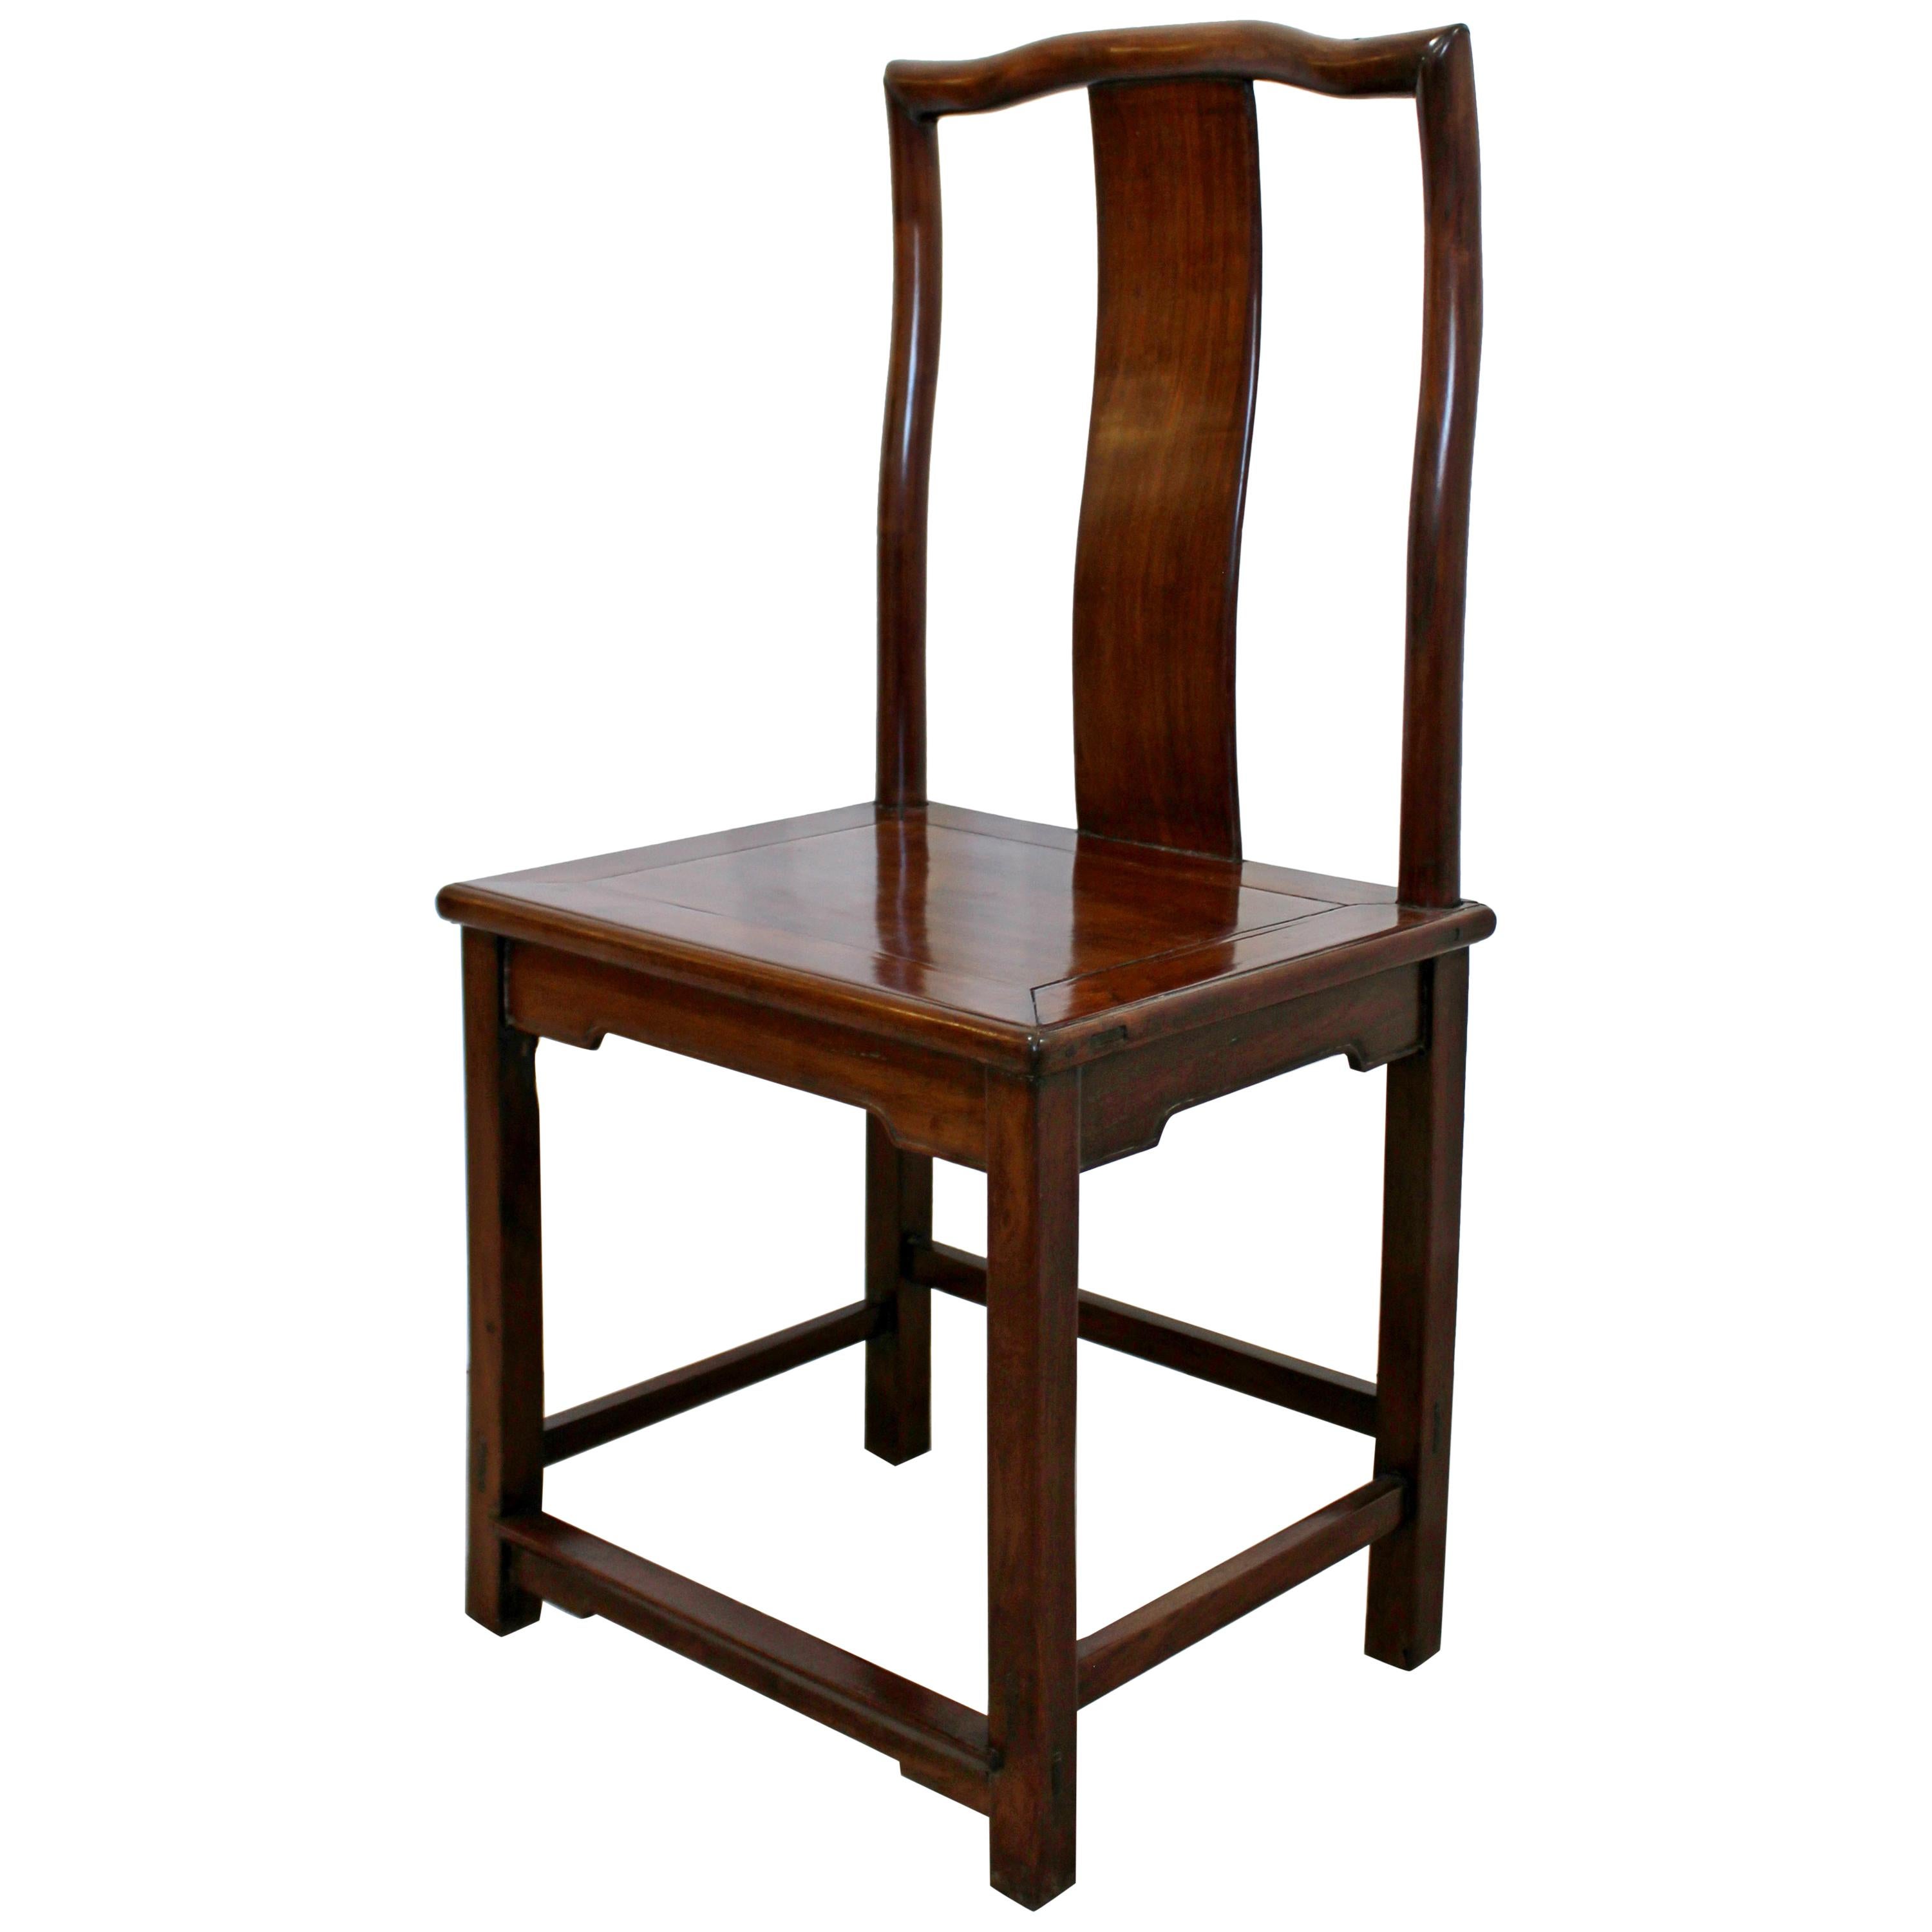 K'ang HSI Ming Vintage Asian Side Accent Chair